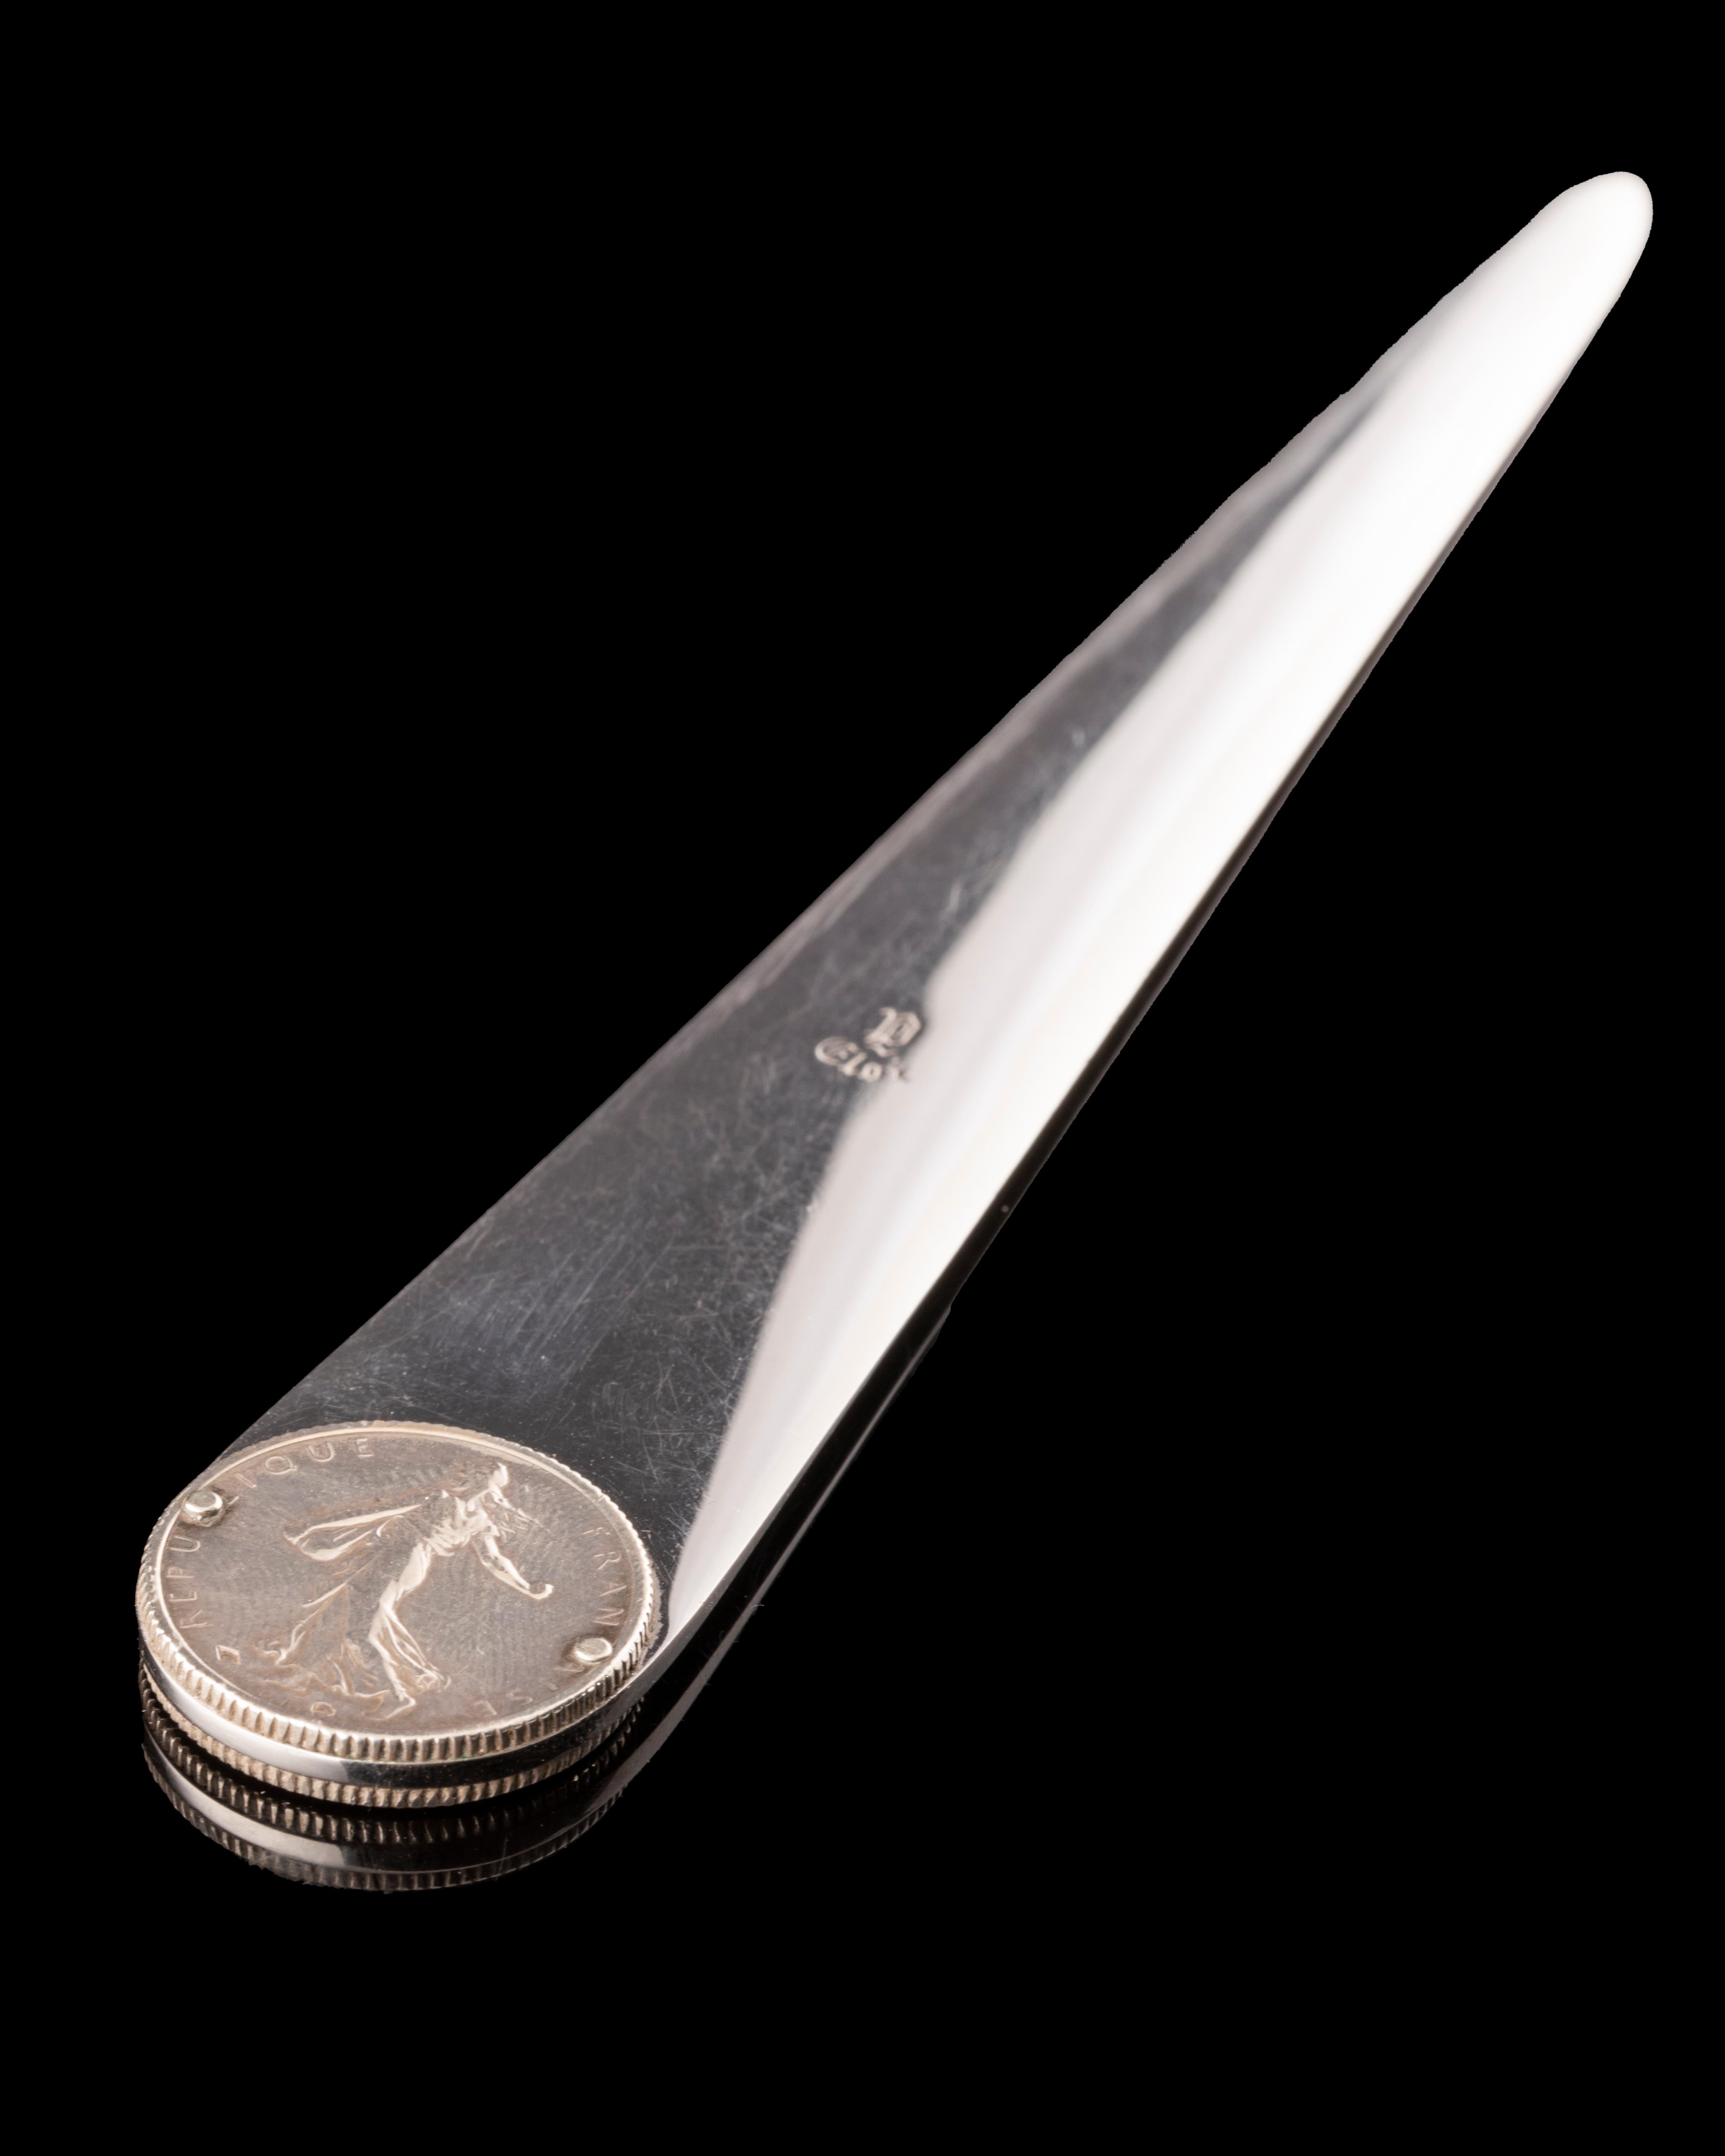 Step into a world of refined elegance with the 80's Vintage Hermès Letter Opener. Crafted with the radiant gleam of metal argenté, this exquisite piece showcases meticulous detailing and two integrated coins. A symbol of timeless grace, it embodies